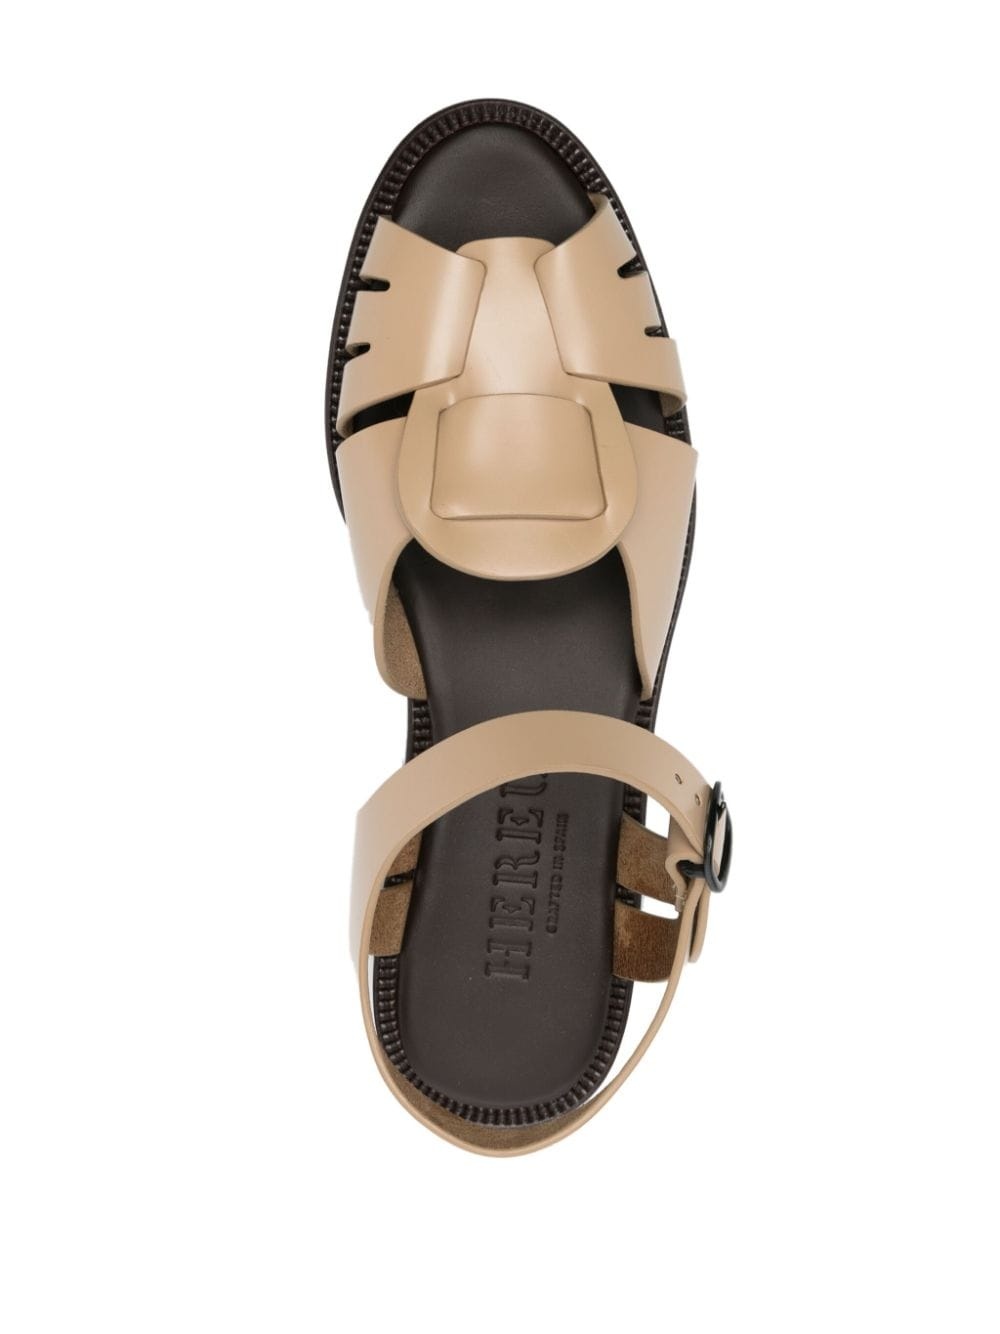 Ancora leather sandals - 4